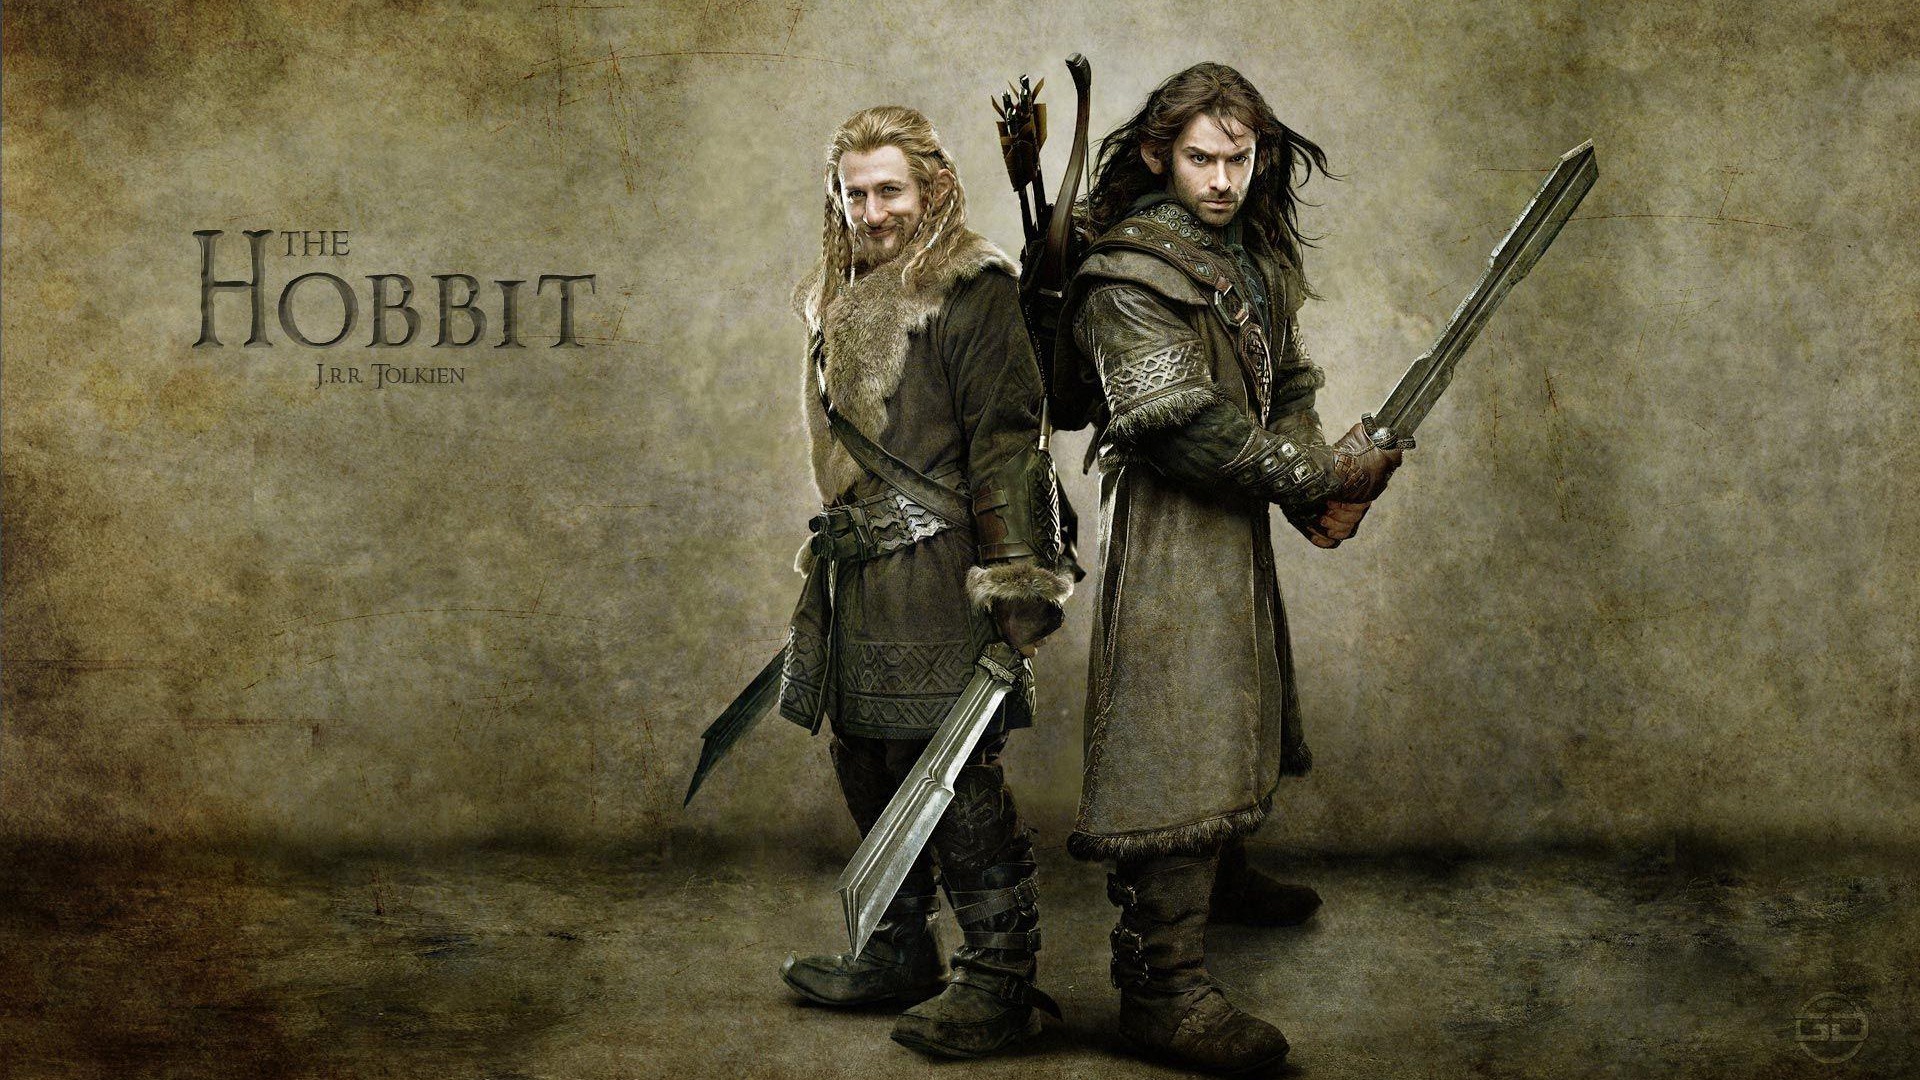 The Hobbit: An Unexpected Journey HD wallpapers #8 - 1920x1080